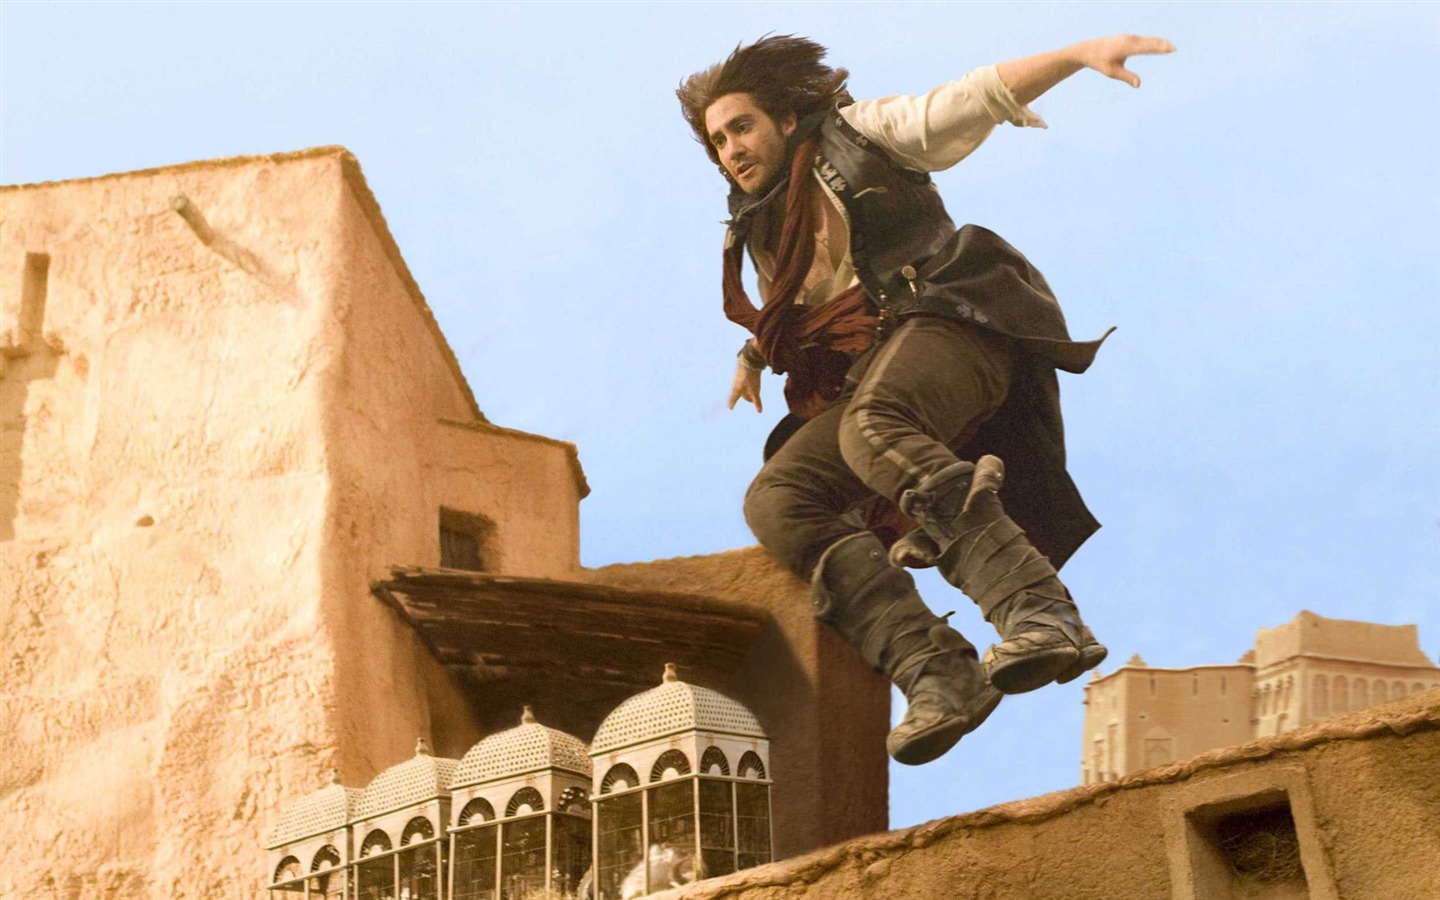 Prince of Persia The Sands of Time 波斯王子：時之刃 #12 - 1440x900